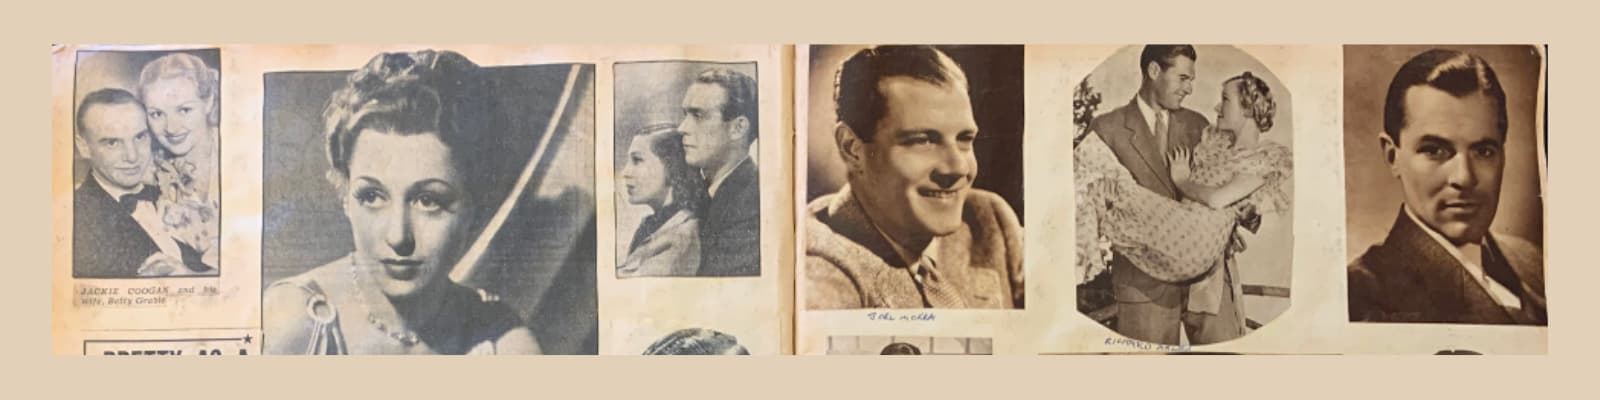 Scrapbook photos from the Cinema Memory and the Digital Archive (CMDA) 